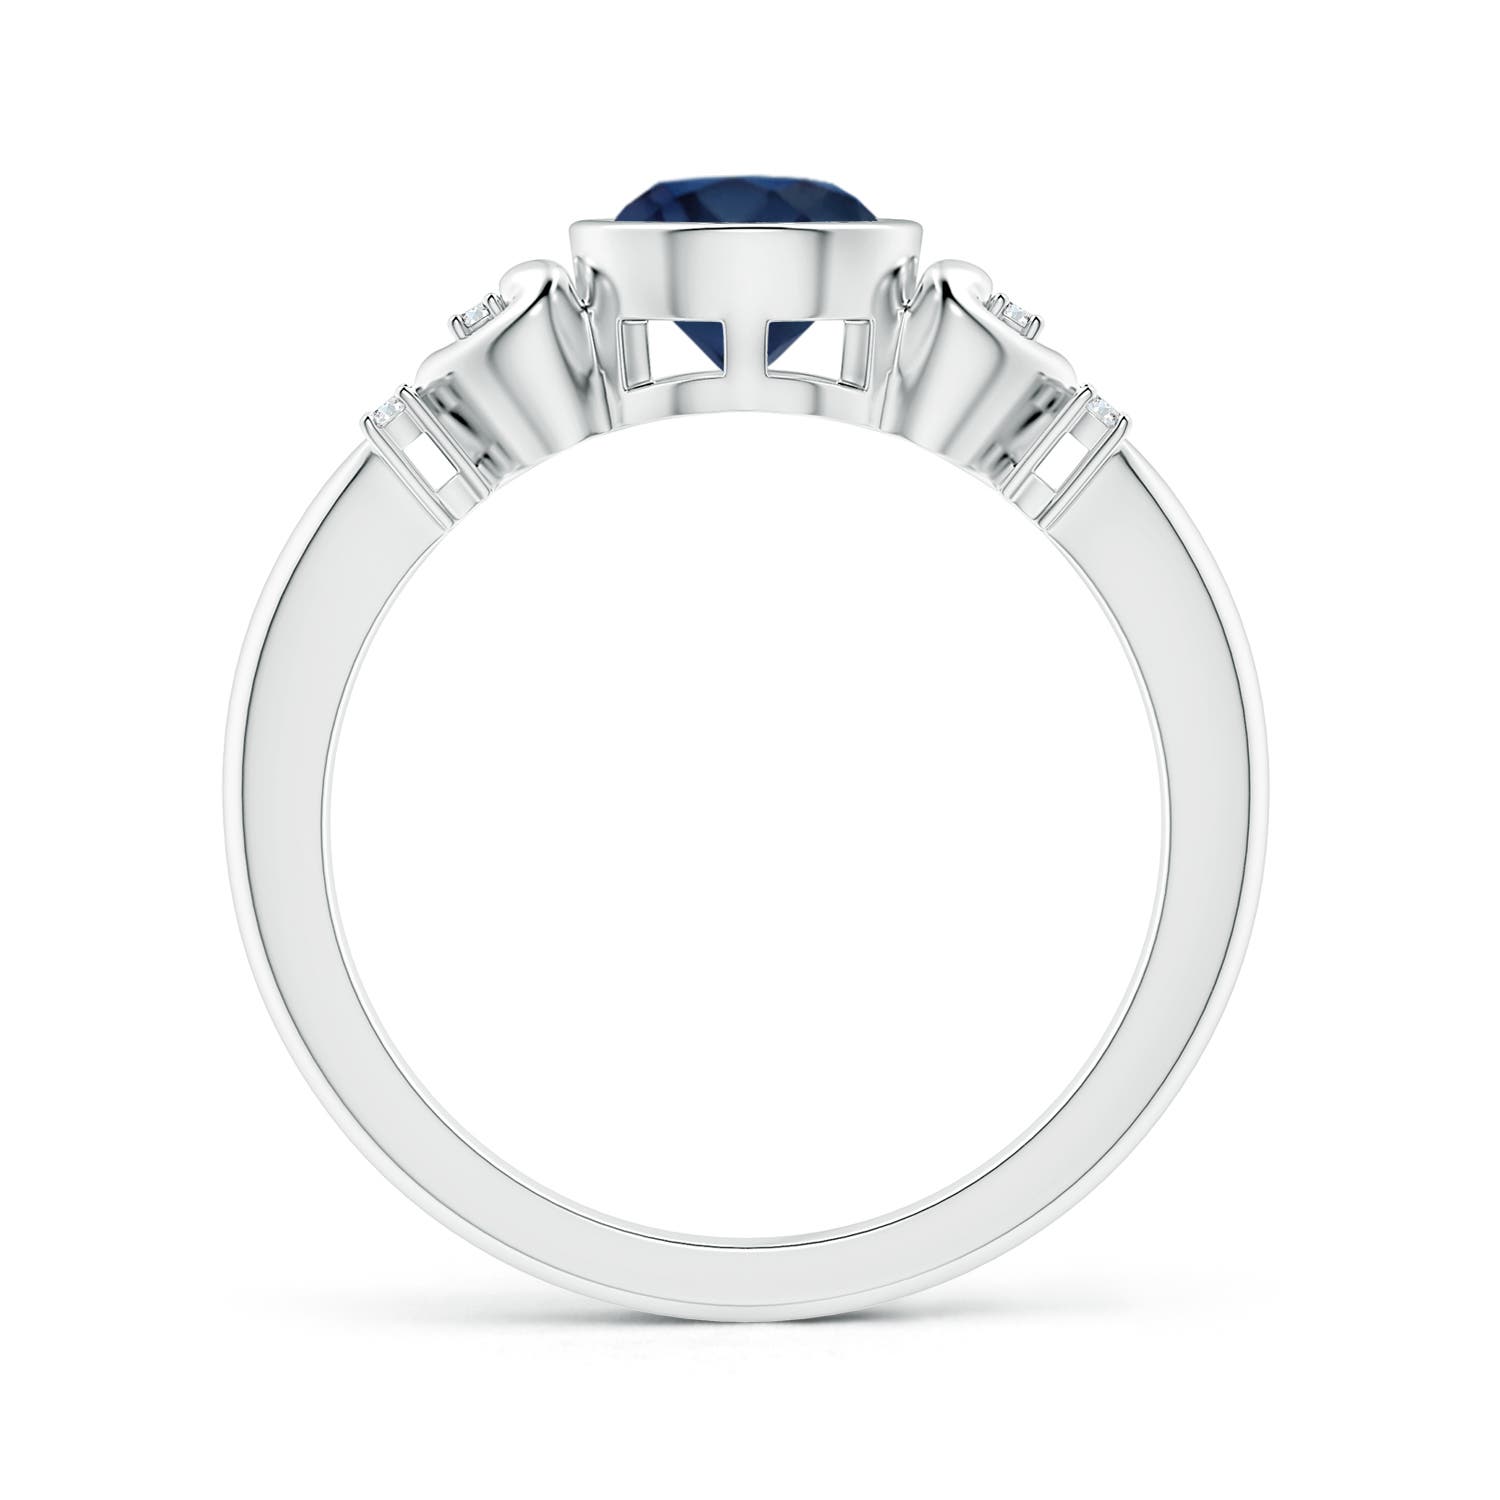 AA - Blue Sapphire / 1.05 CT / 14 KT White Gold